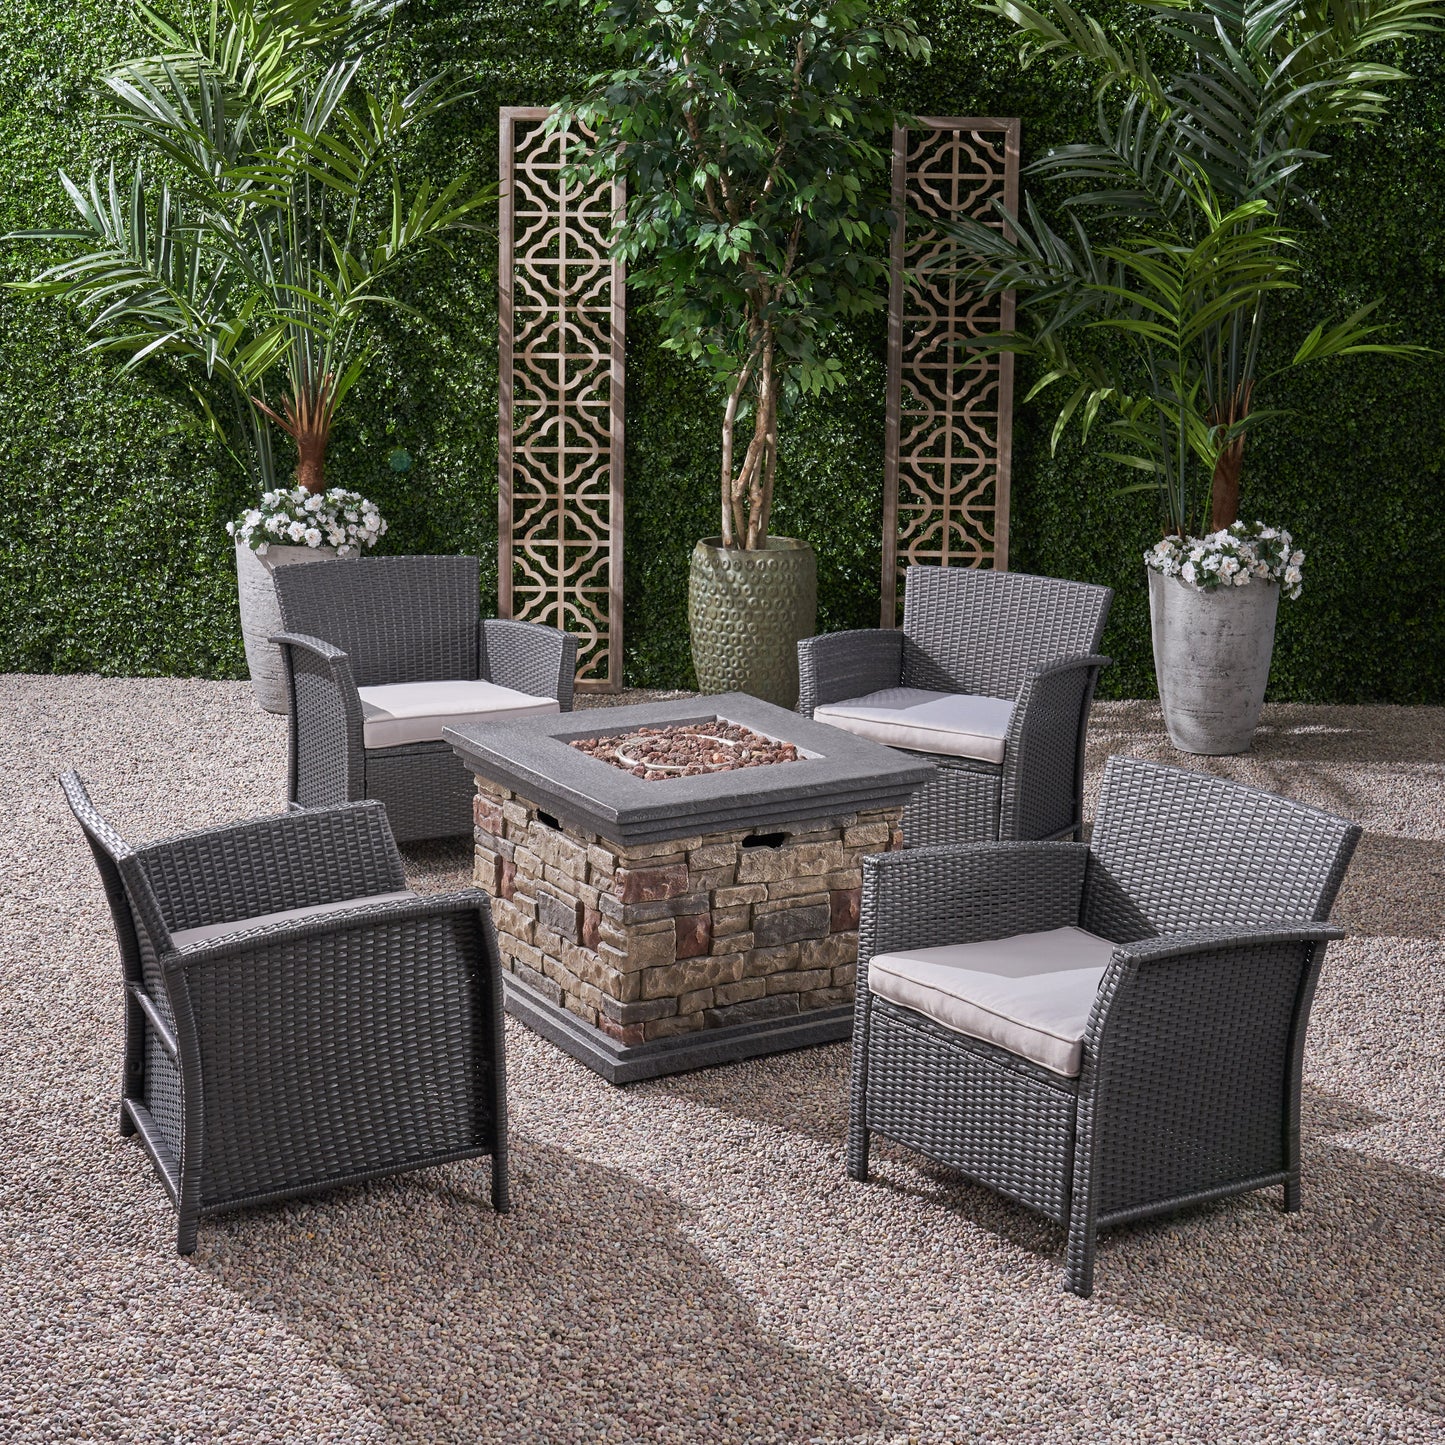 Laiah Outdoor 4 Piece Wicker Club Chair Chat Set with Fire Pit